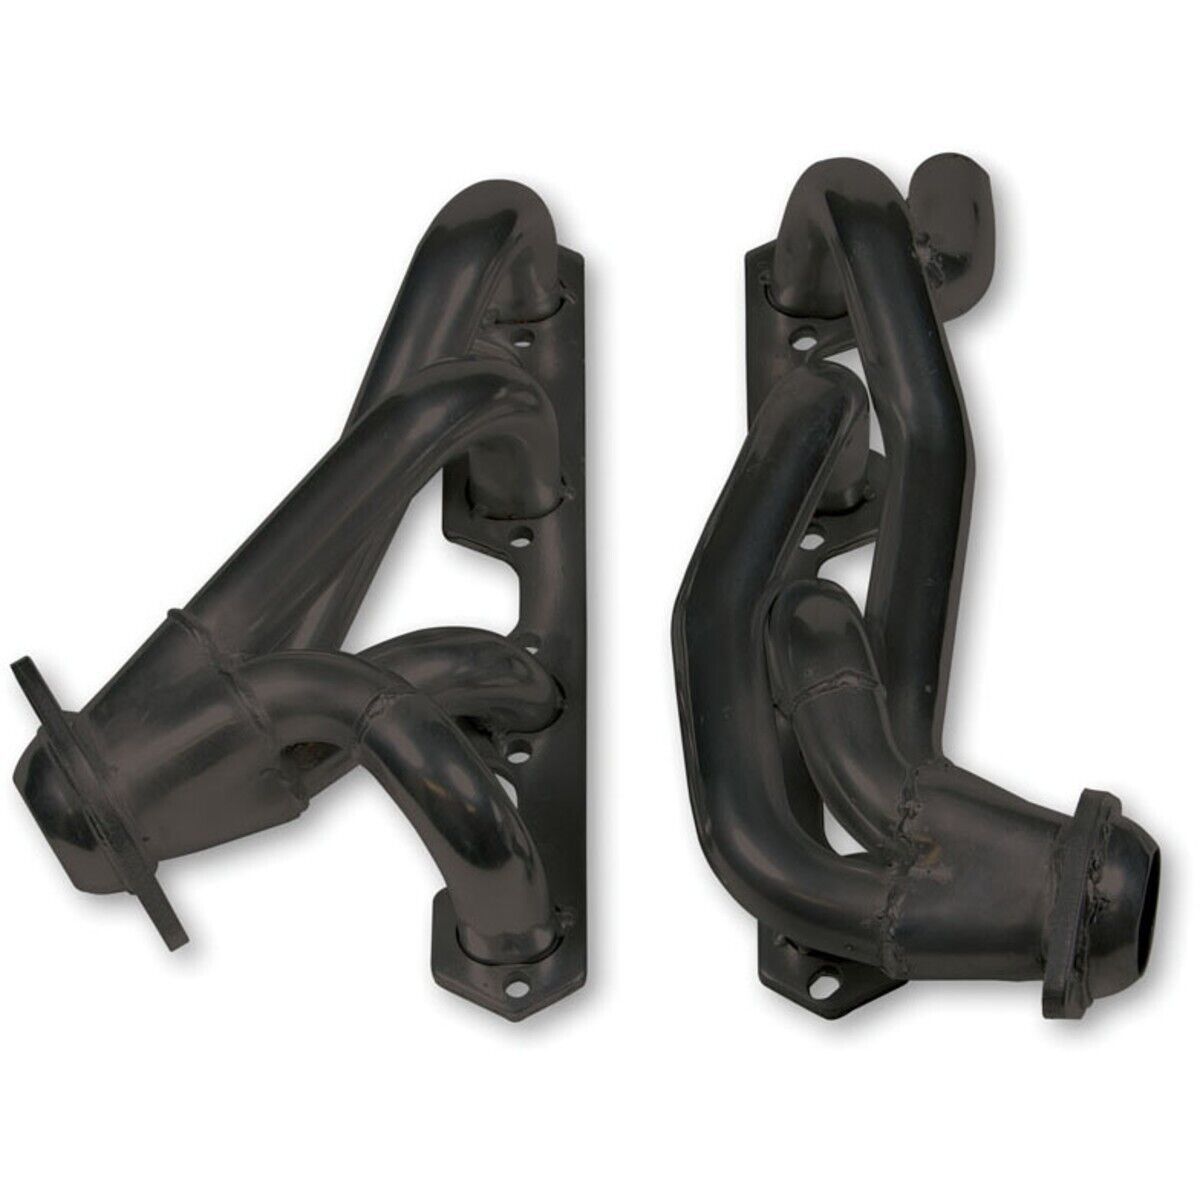 91628FLT Flowtech Set of 2 Headers for F150 Truck F250 Ford F-150 F-250 Pair